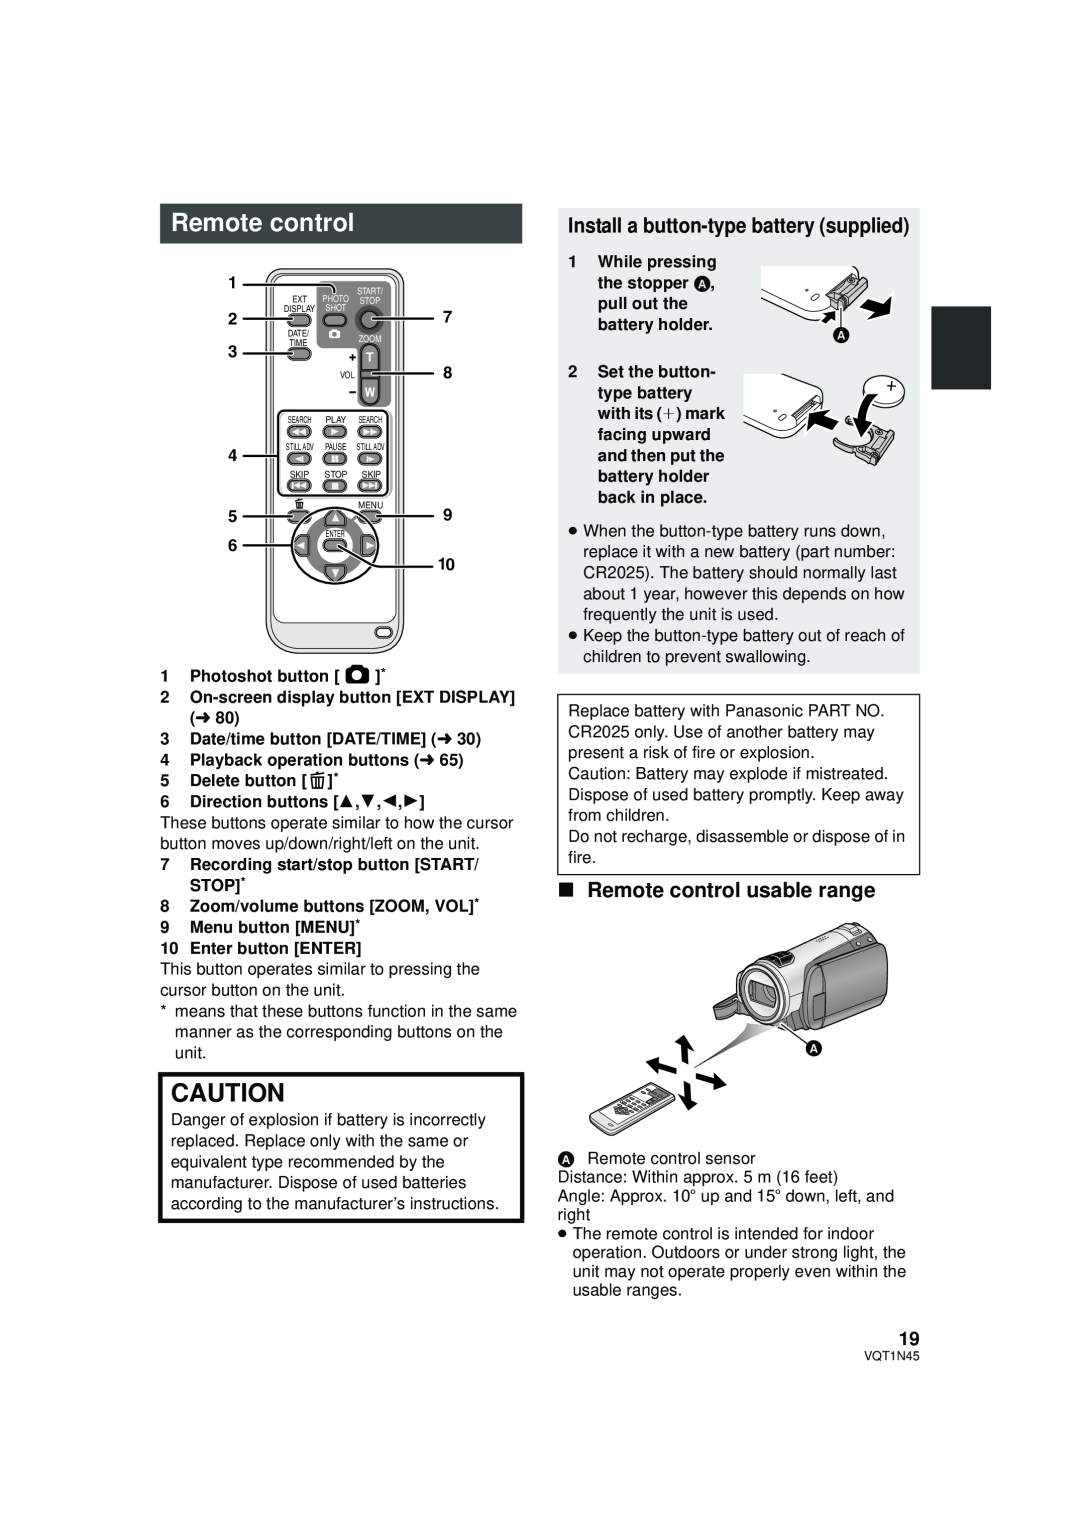 Panasonic HDC-SD9PC manual Install a button-typebattery supplied, Remote control usable range, 1Photoshot button 